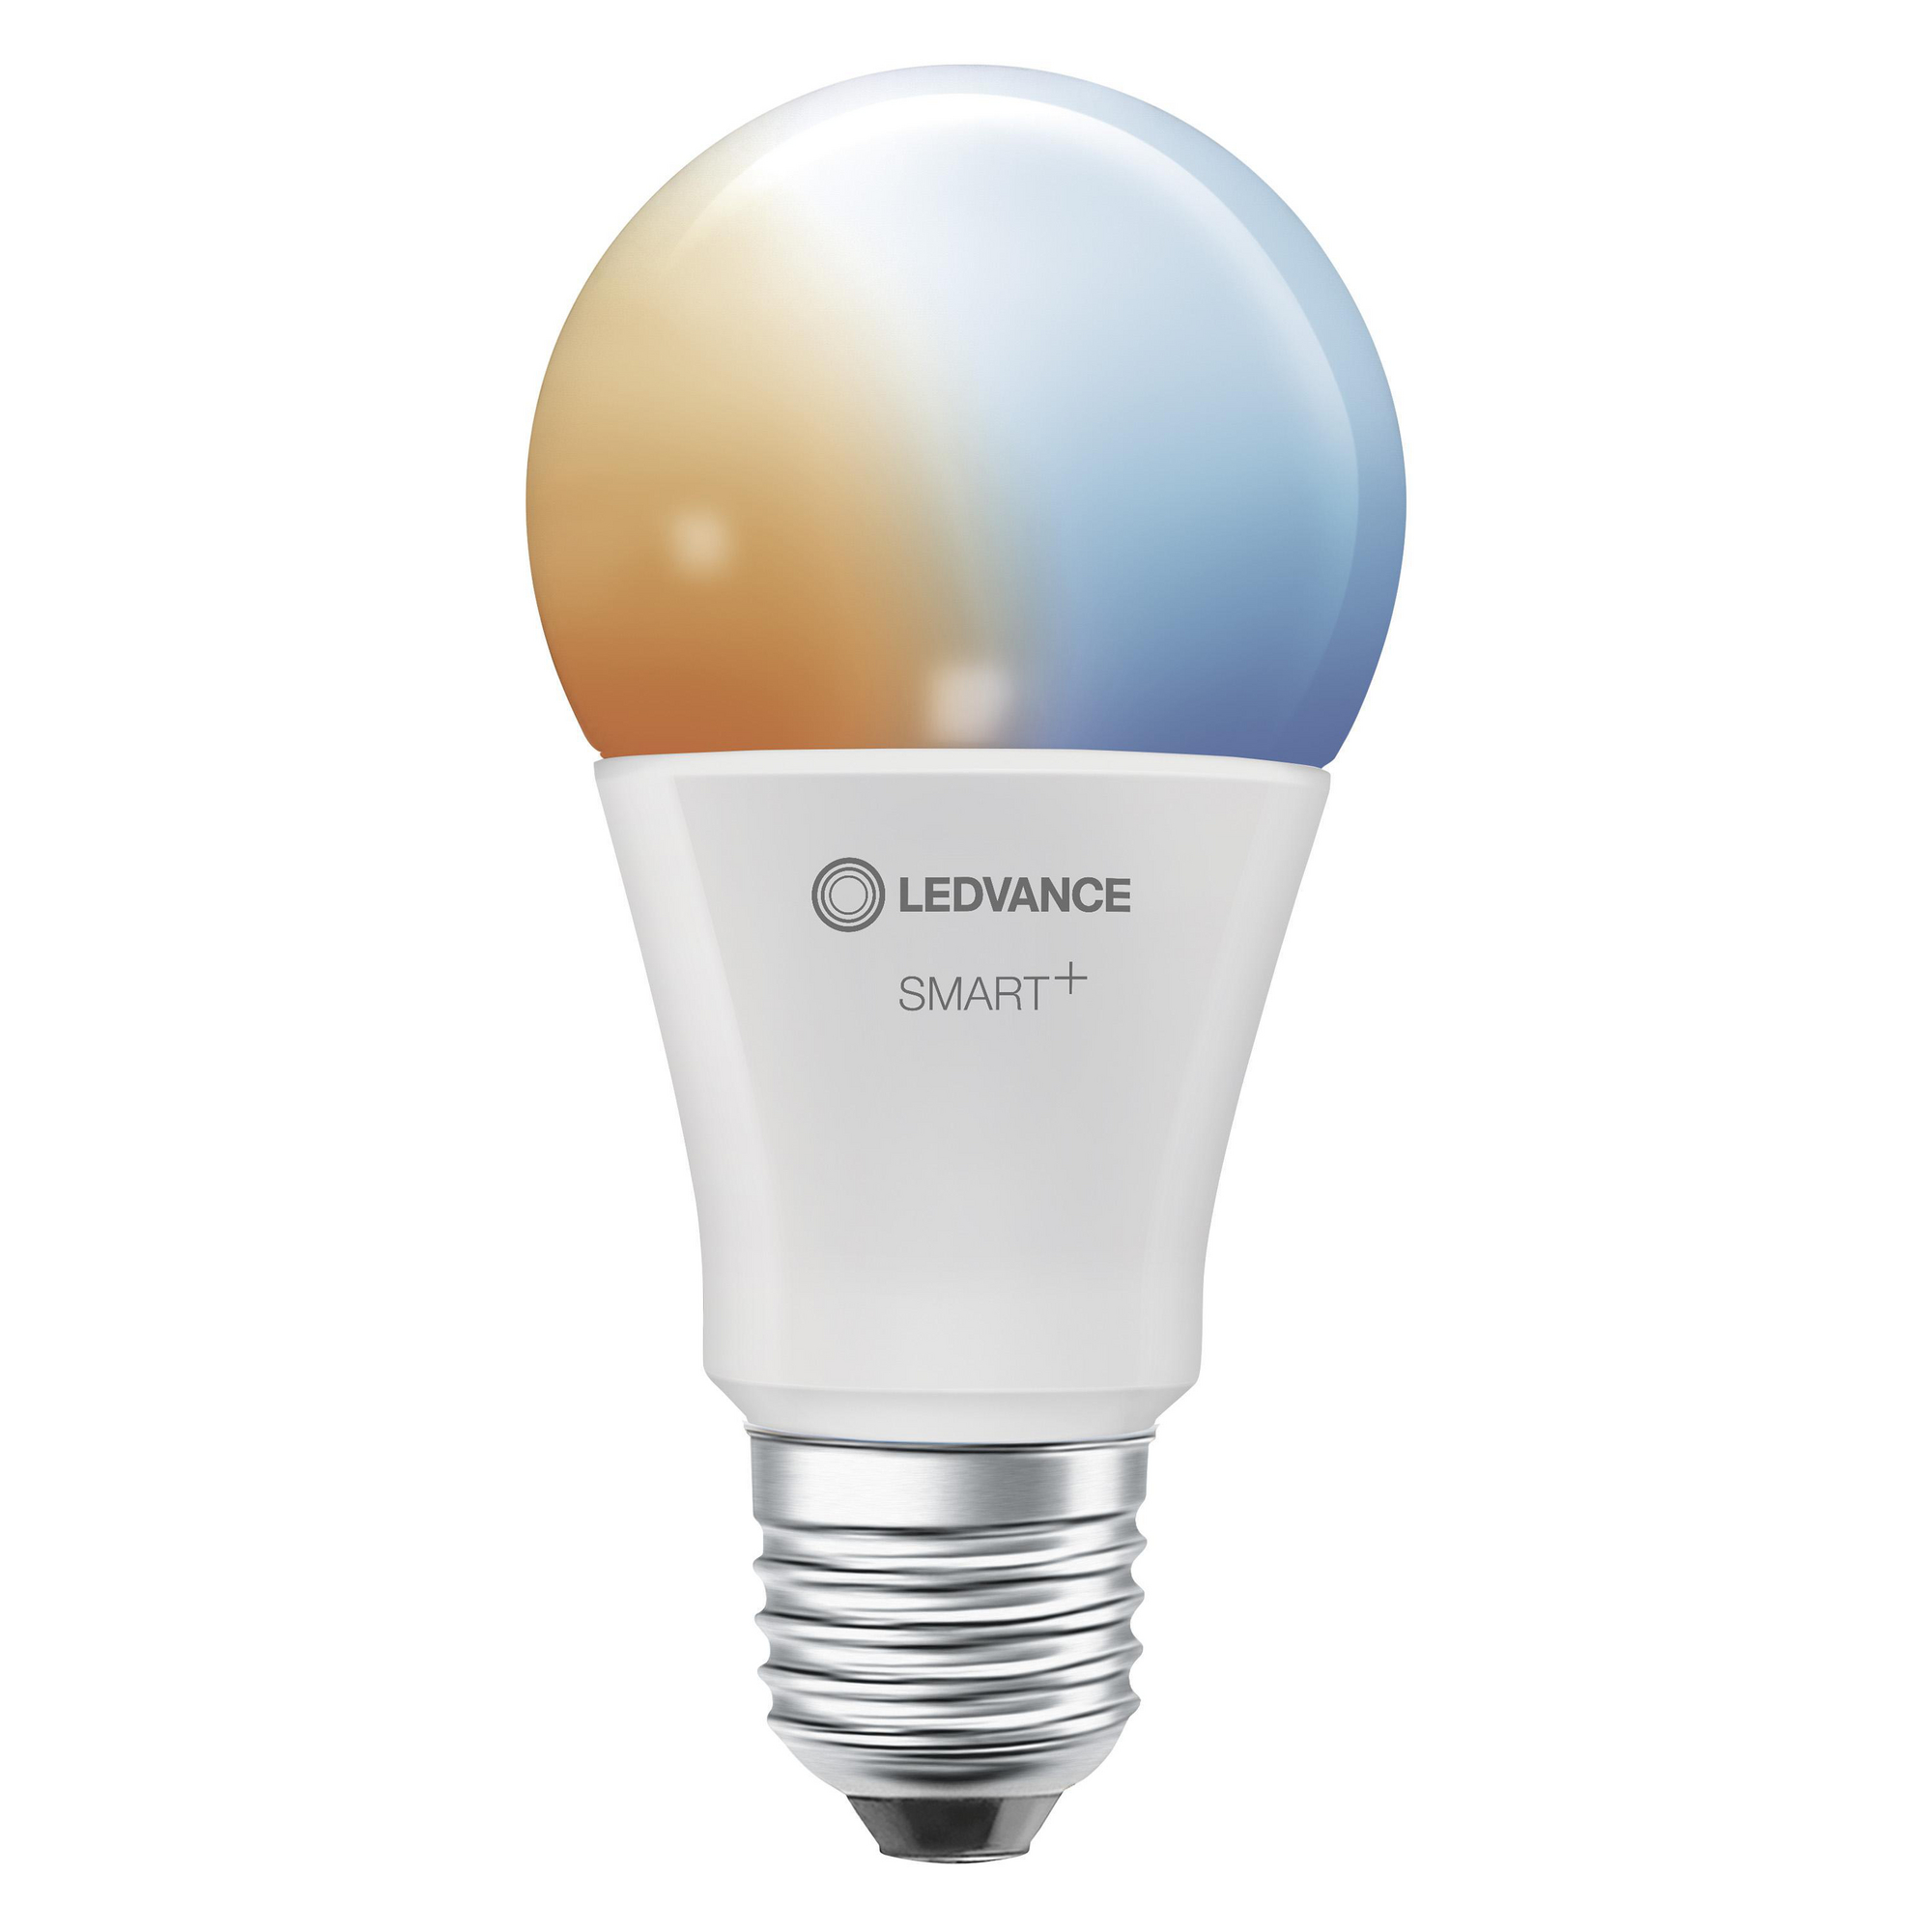 LED-Lampe 'Smart+' 11,5 cm 806 lm 9 W E27 weiß Bluetooth Tunable White + product picture